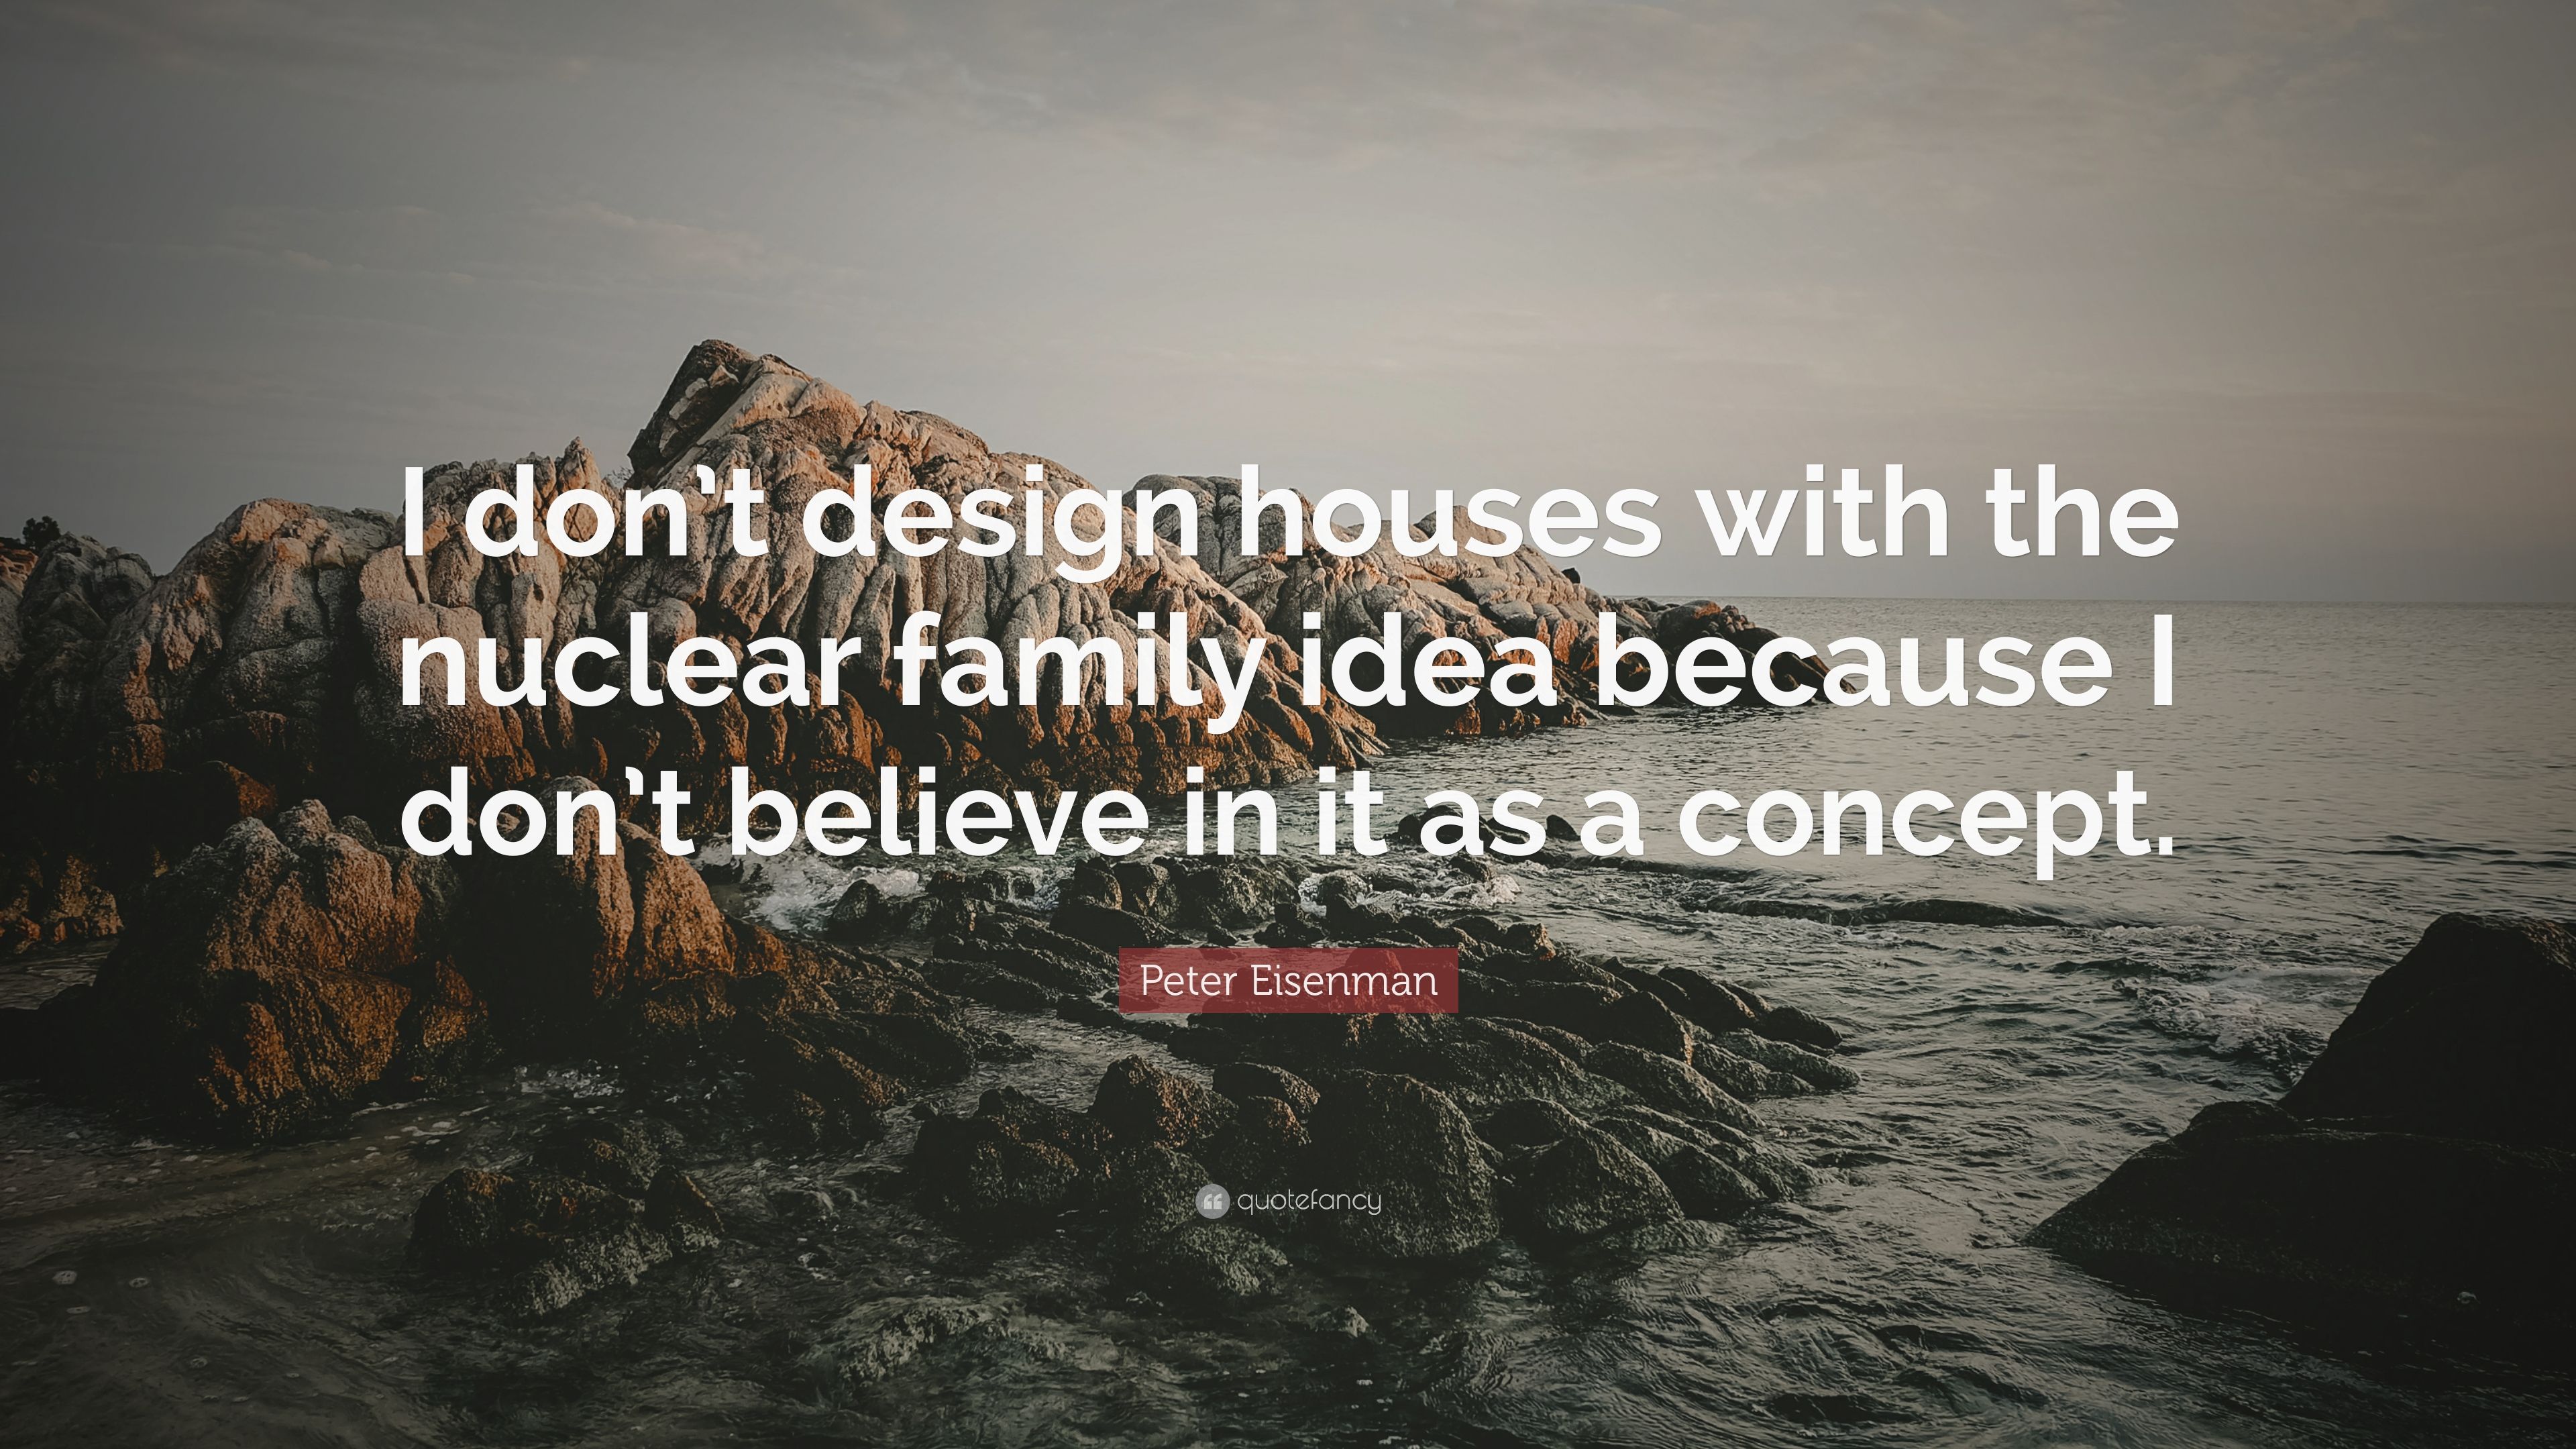 Peter eisenman quote âi dont design houses with the nuclear family idea because i don